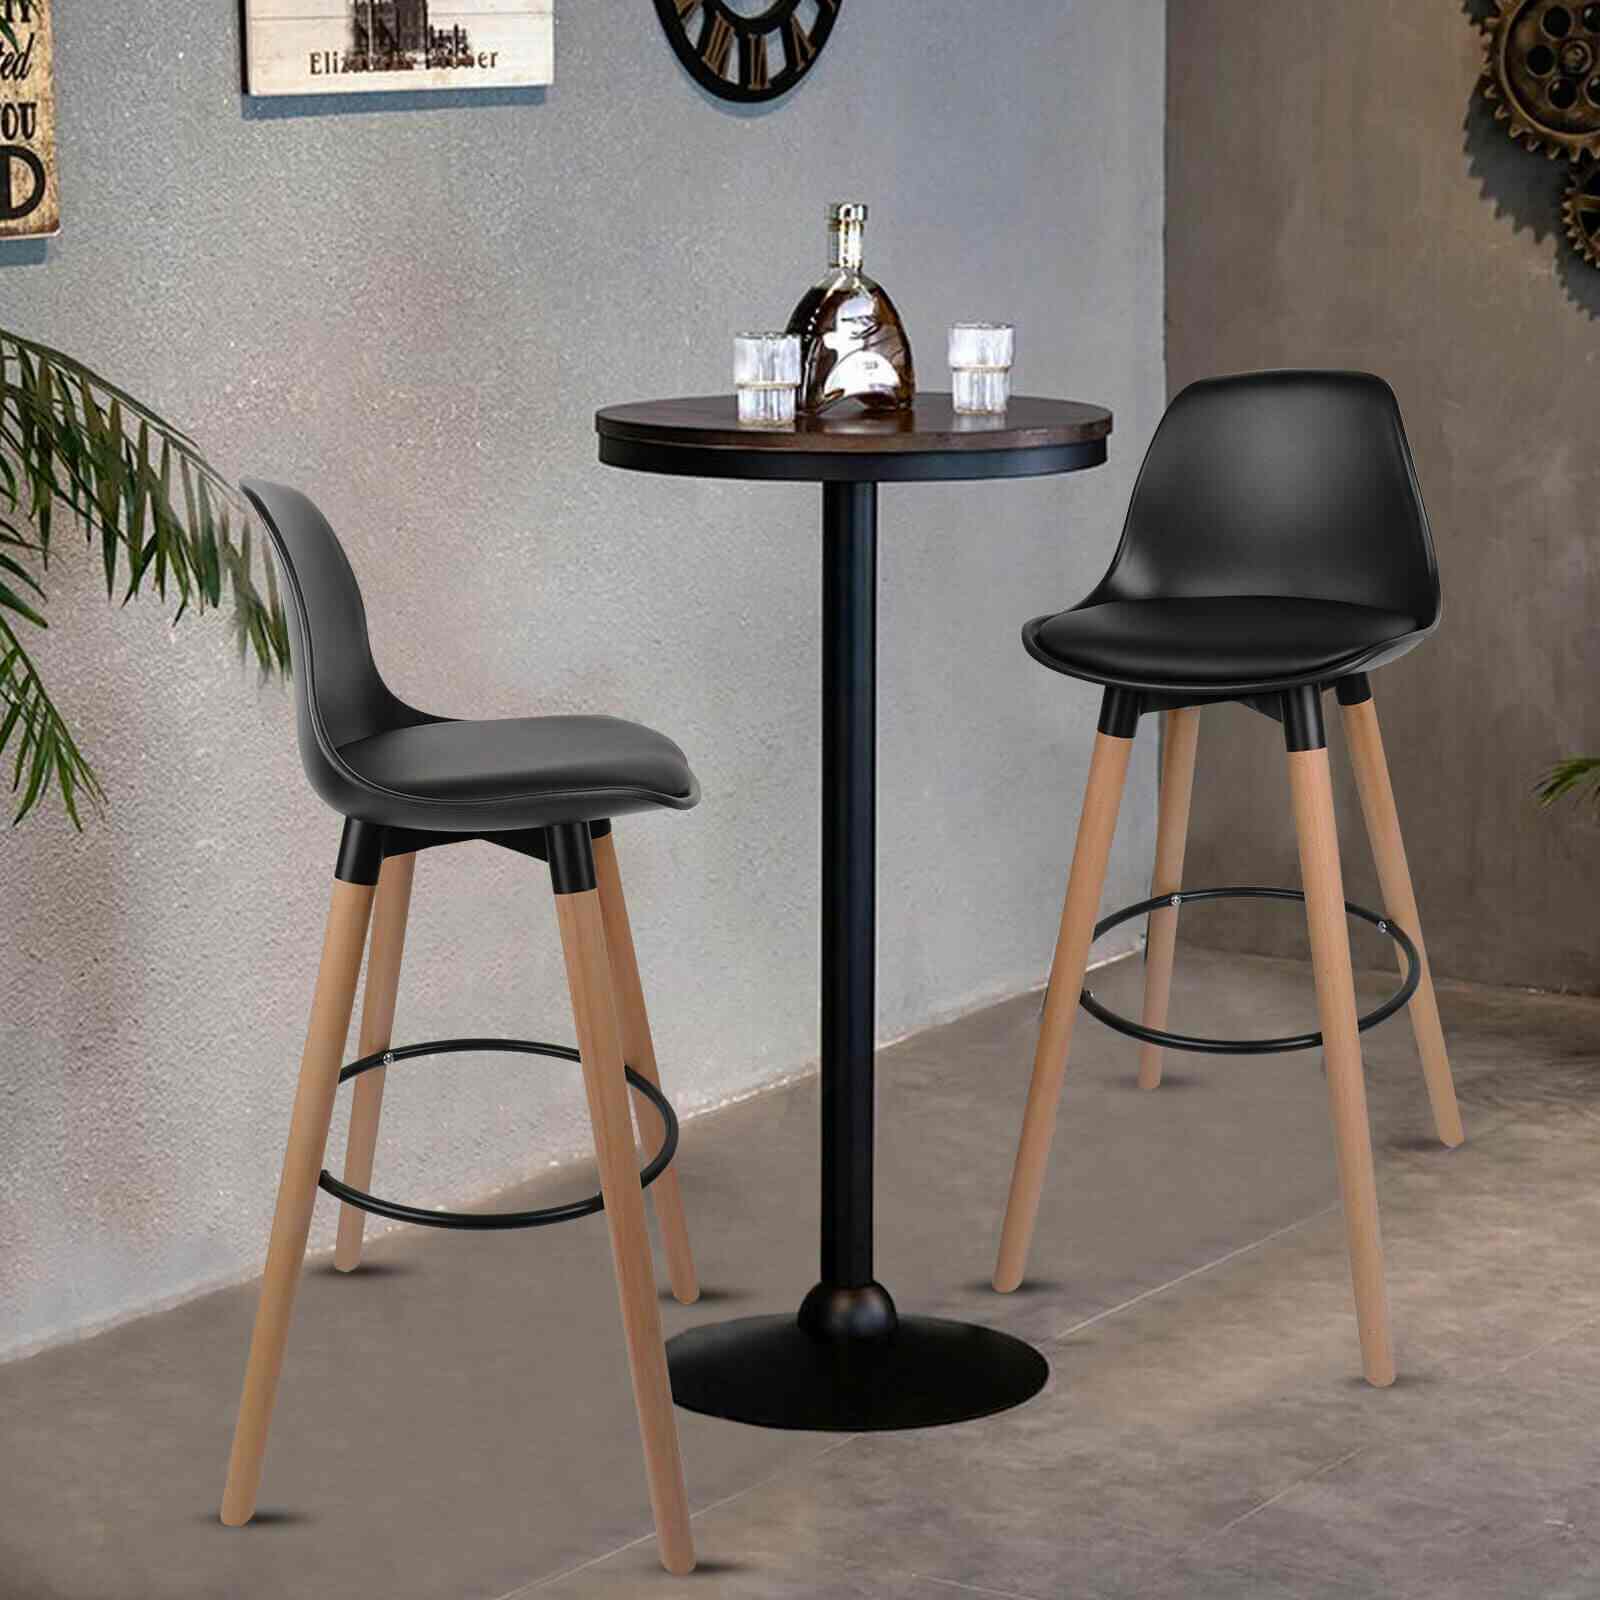 Durable 29" PU Leather Chair Bar Stools, 2/4Pcs